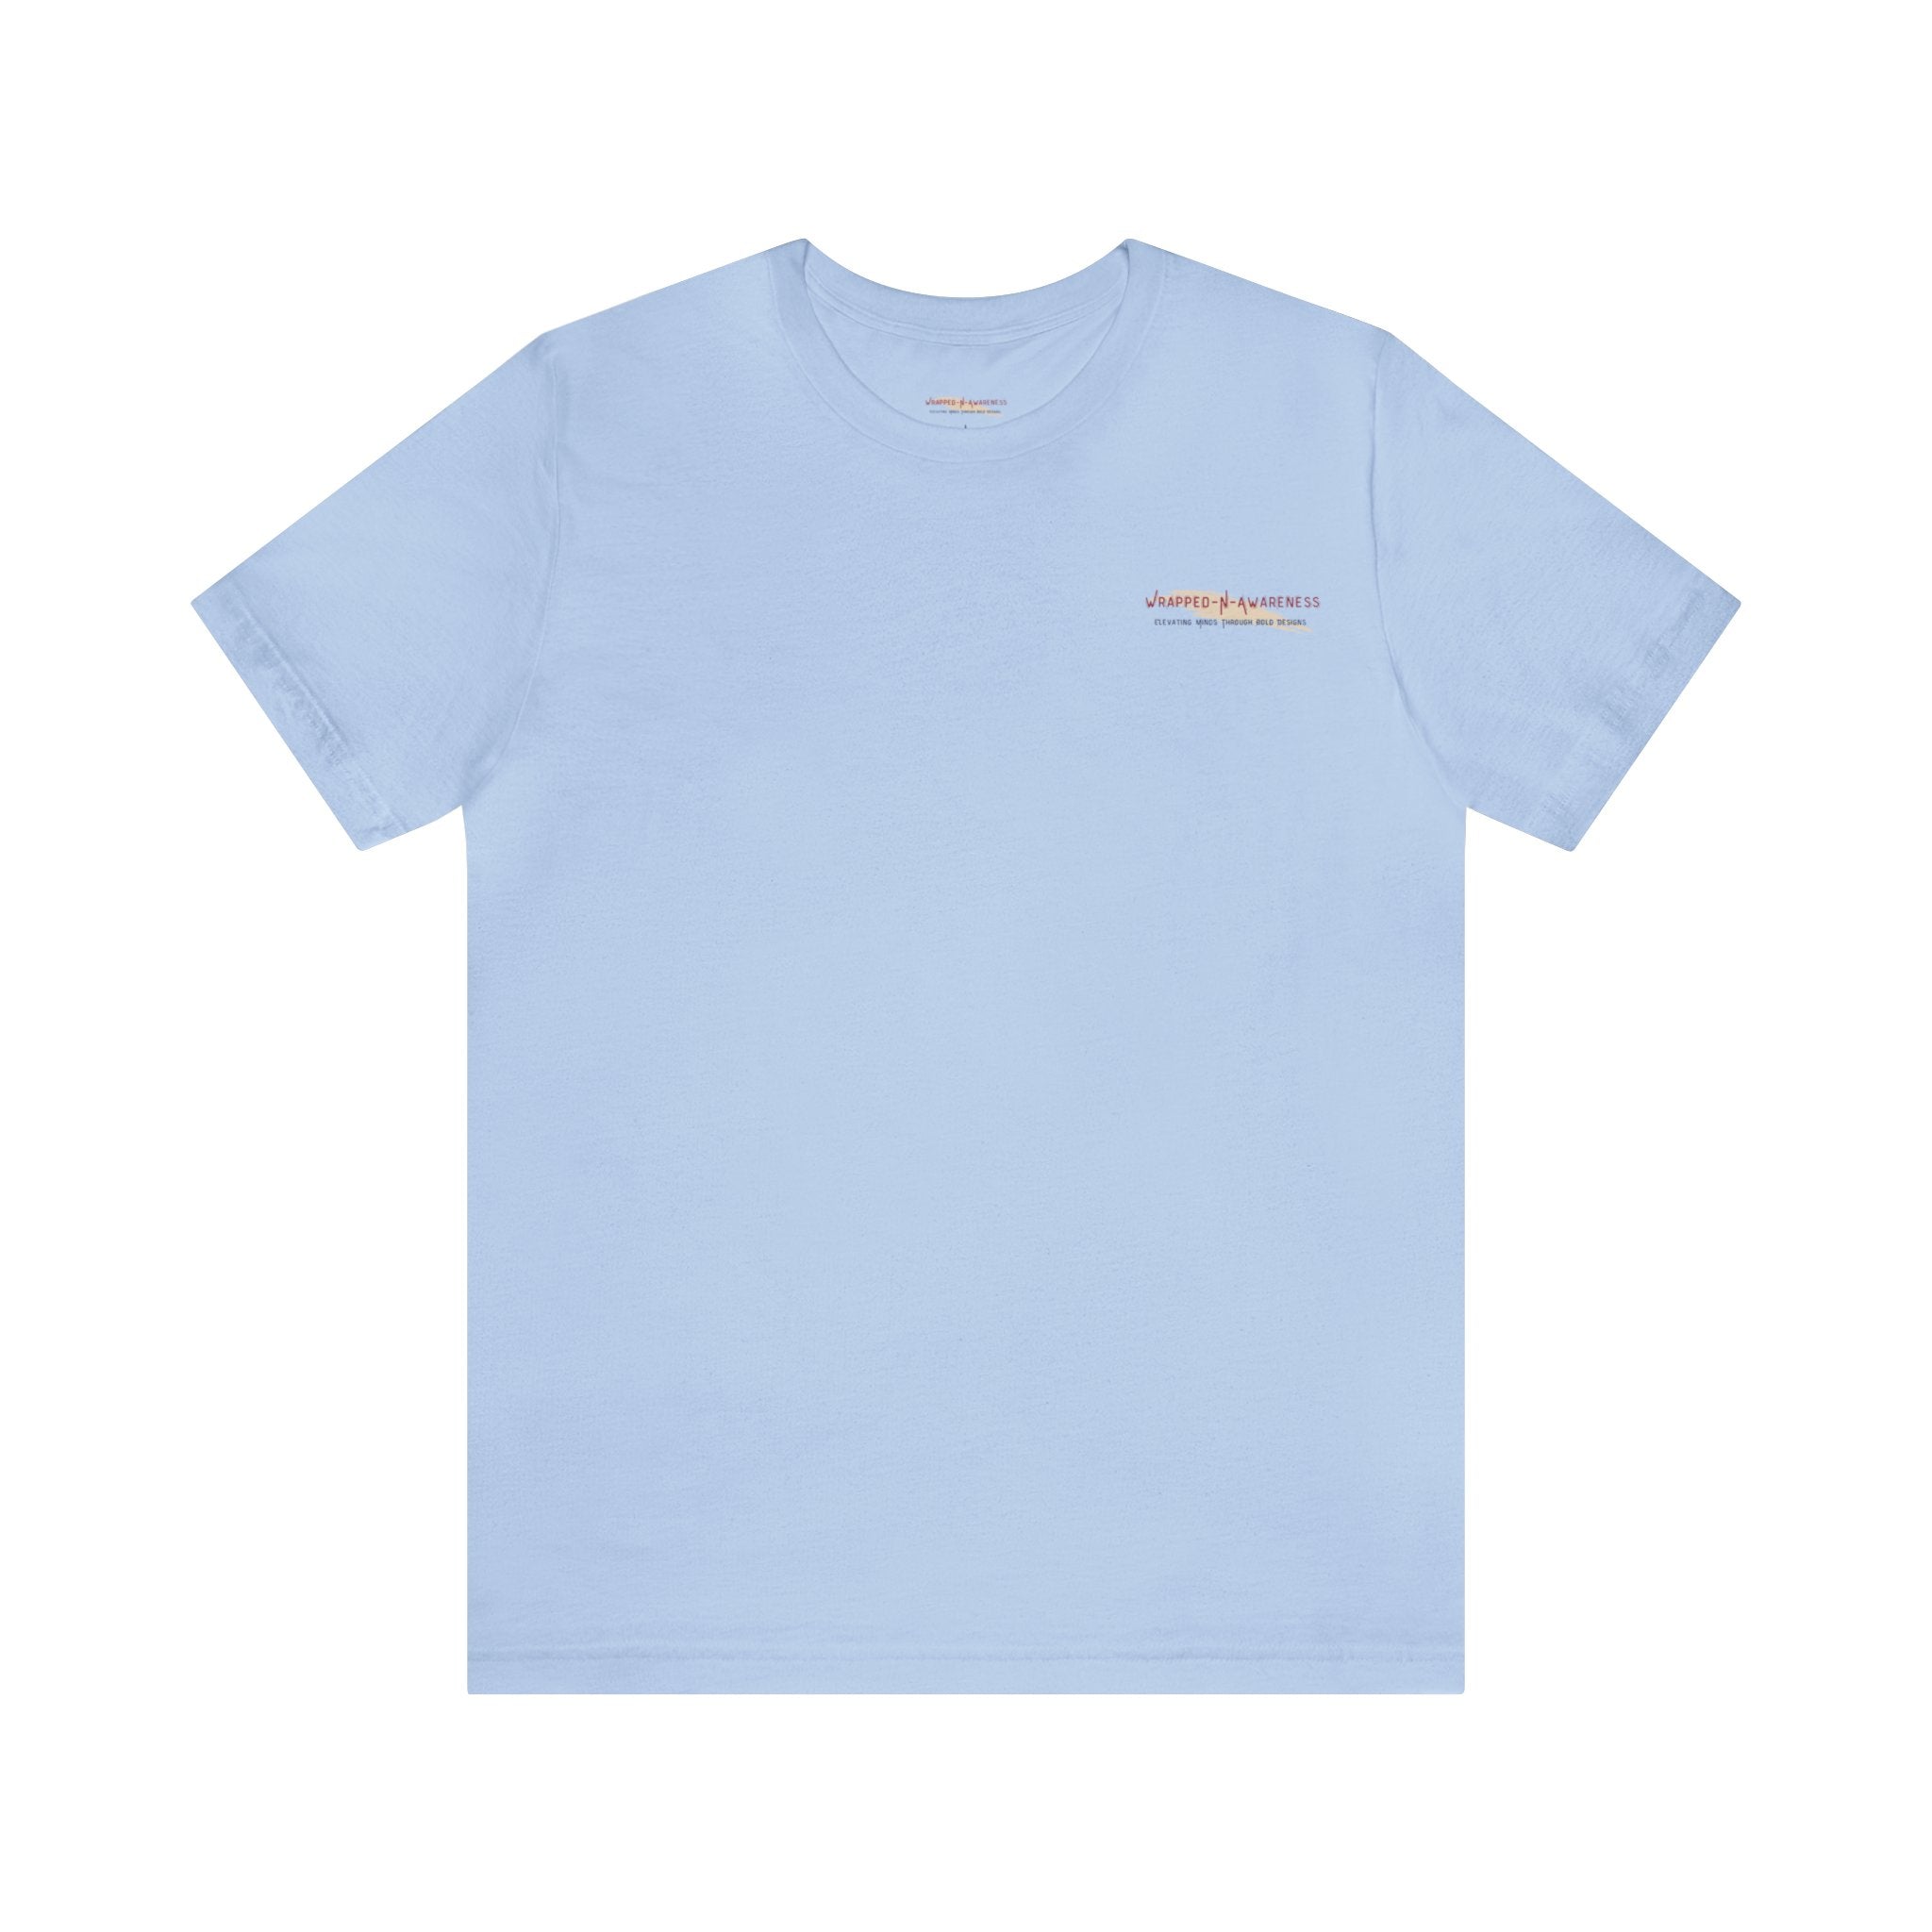 Mindfulness Heals Wounds Tee - Bella+Canvas 3001 Turquoise Airlume Cotton Bella+Canvas 3001 Crew Neckline Jersey Short Sleeve Lightweight Fabric Mental Health Support Retail Fit Tear-away Label Tee Unisex Tee T-Shirt 848862650415422933_2048 Printify